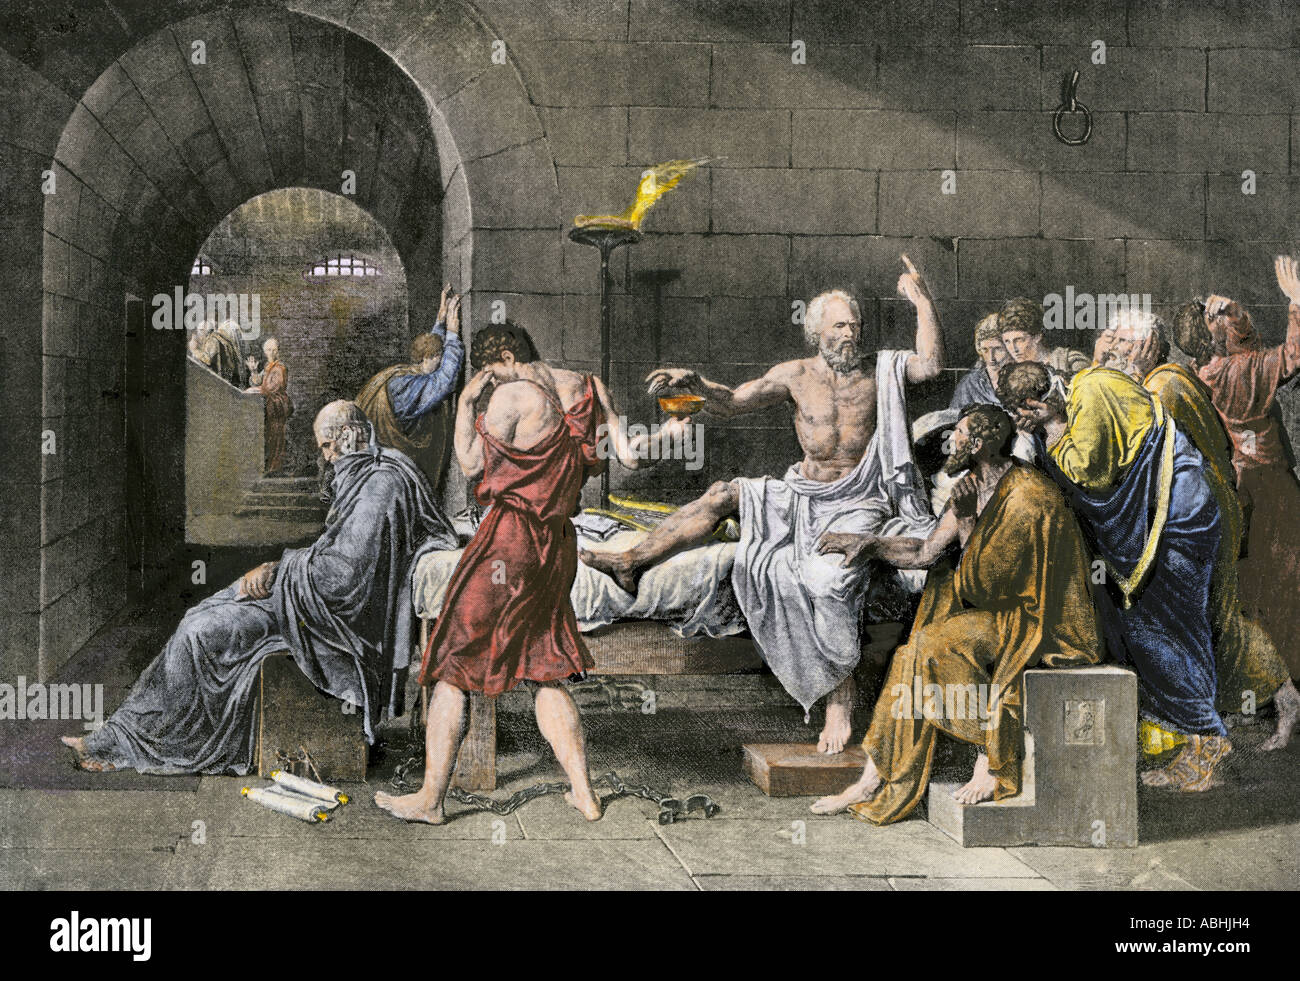 Suicide of Socrates by drinking poisonous hemlock. Hand-colored engraving of artwork by Jacques Louis David Stock Photo